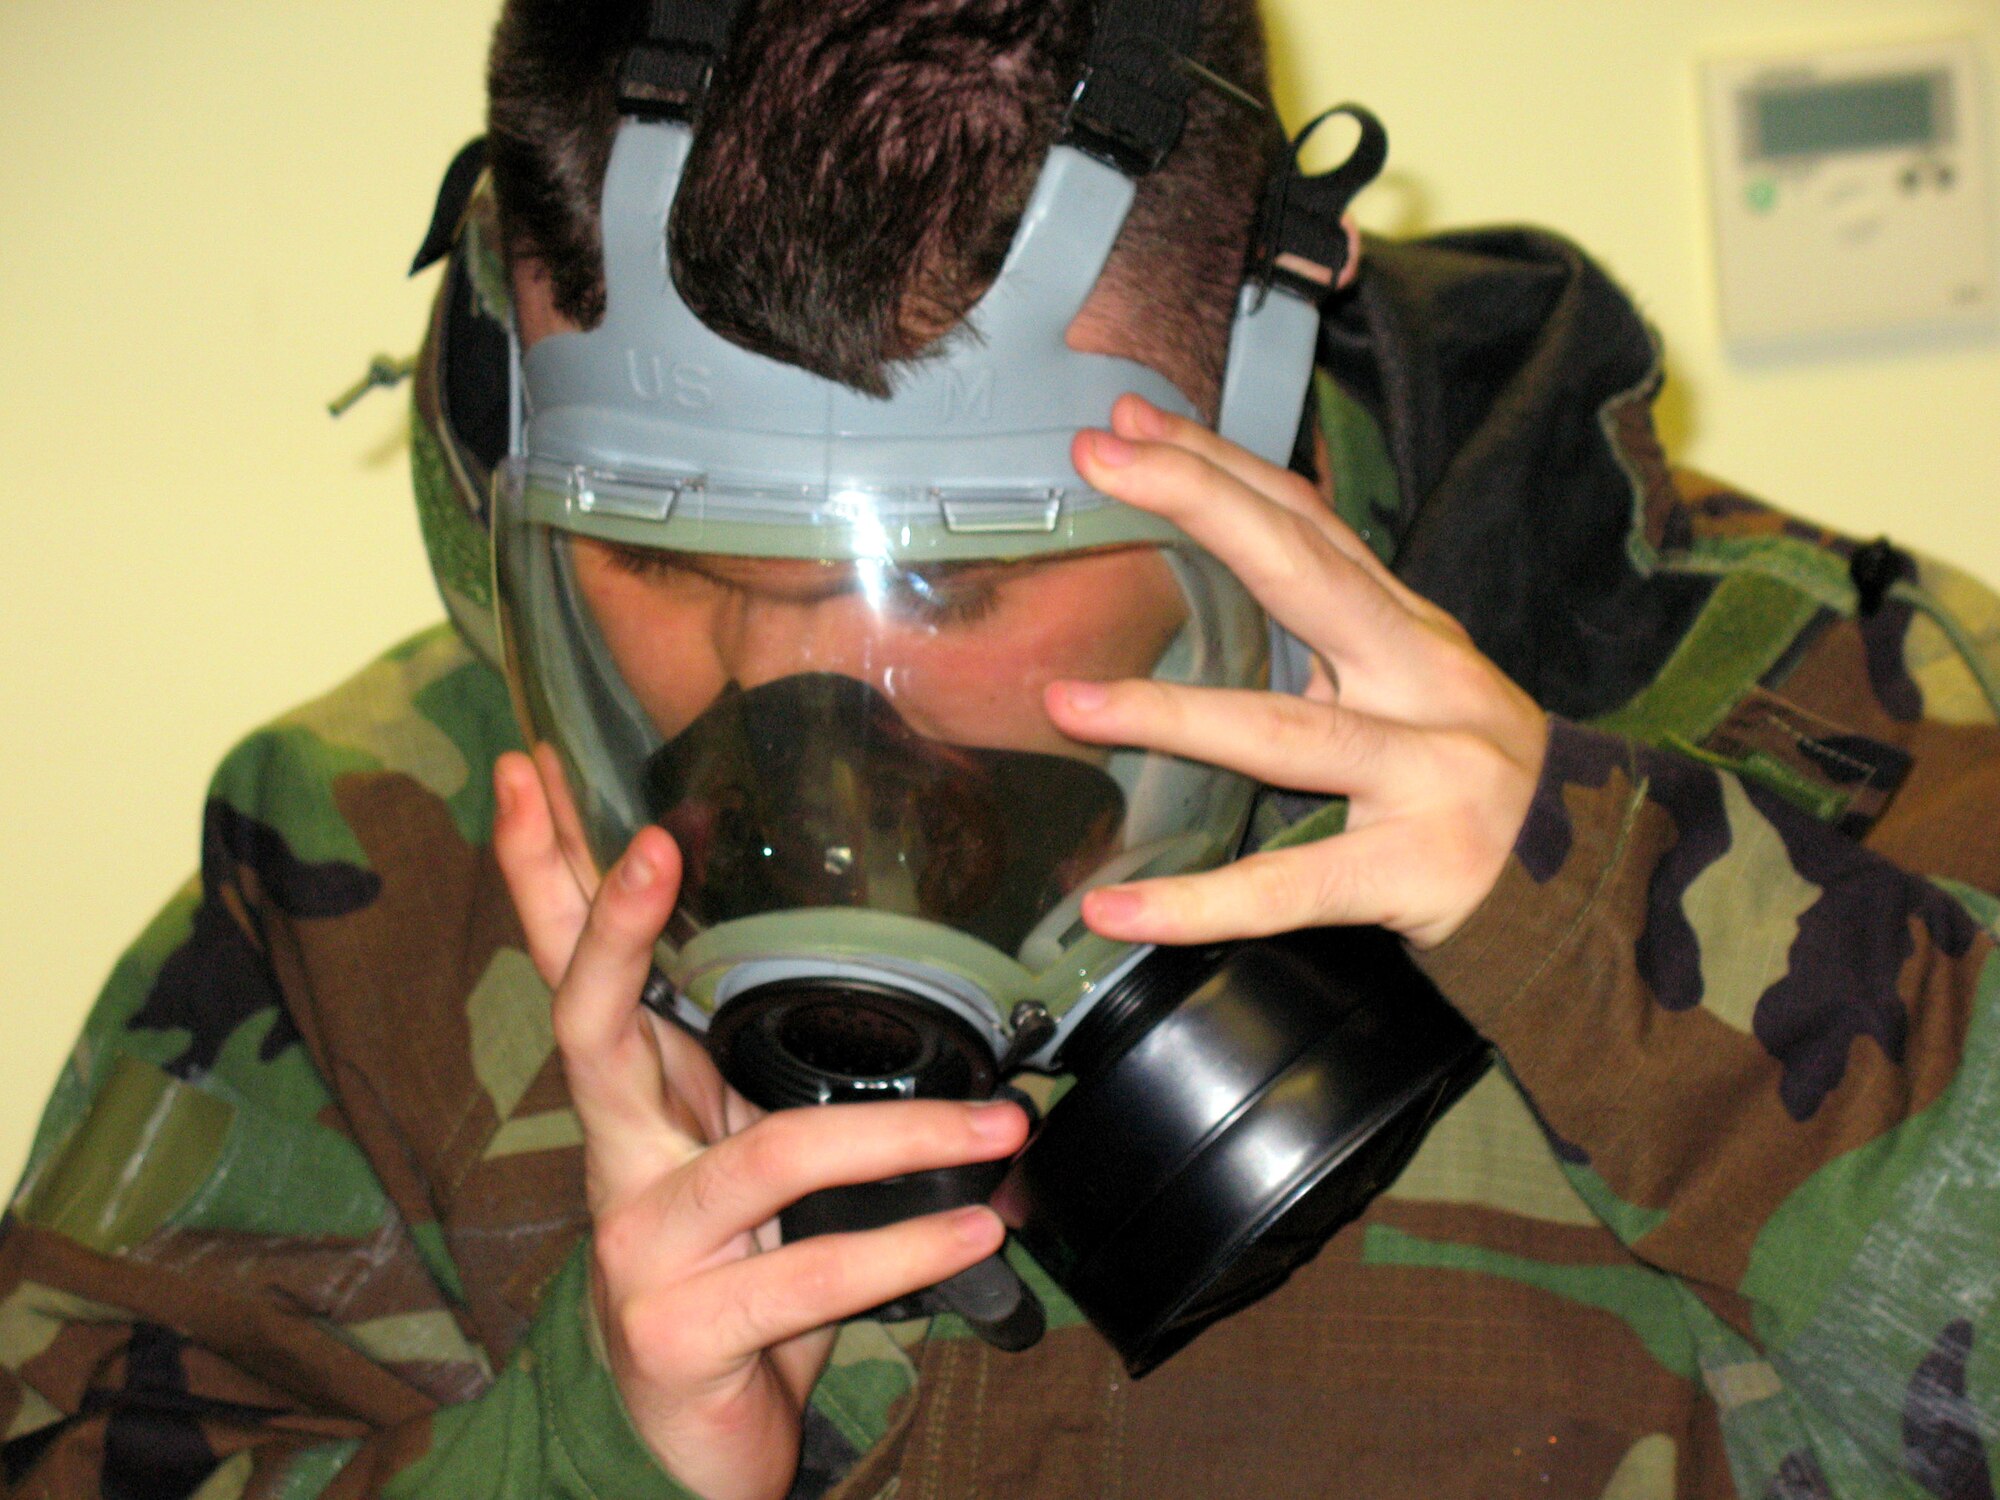 An Airman dons a gas mask during an April 2 exercise at Incirlik Air Base, Turkey. Base members were evaluated on how they could respond to a major earthquake and other scenarios during the exercise to ensure they are prepared and trained for potential threats. (U.S. Air Force photo)